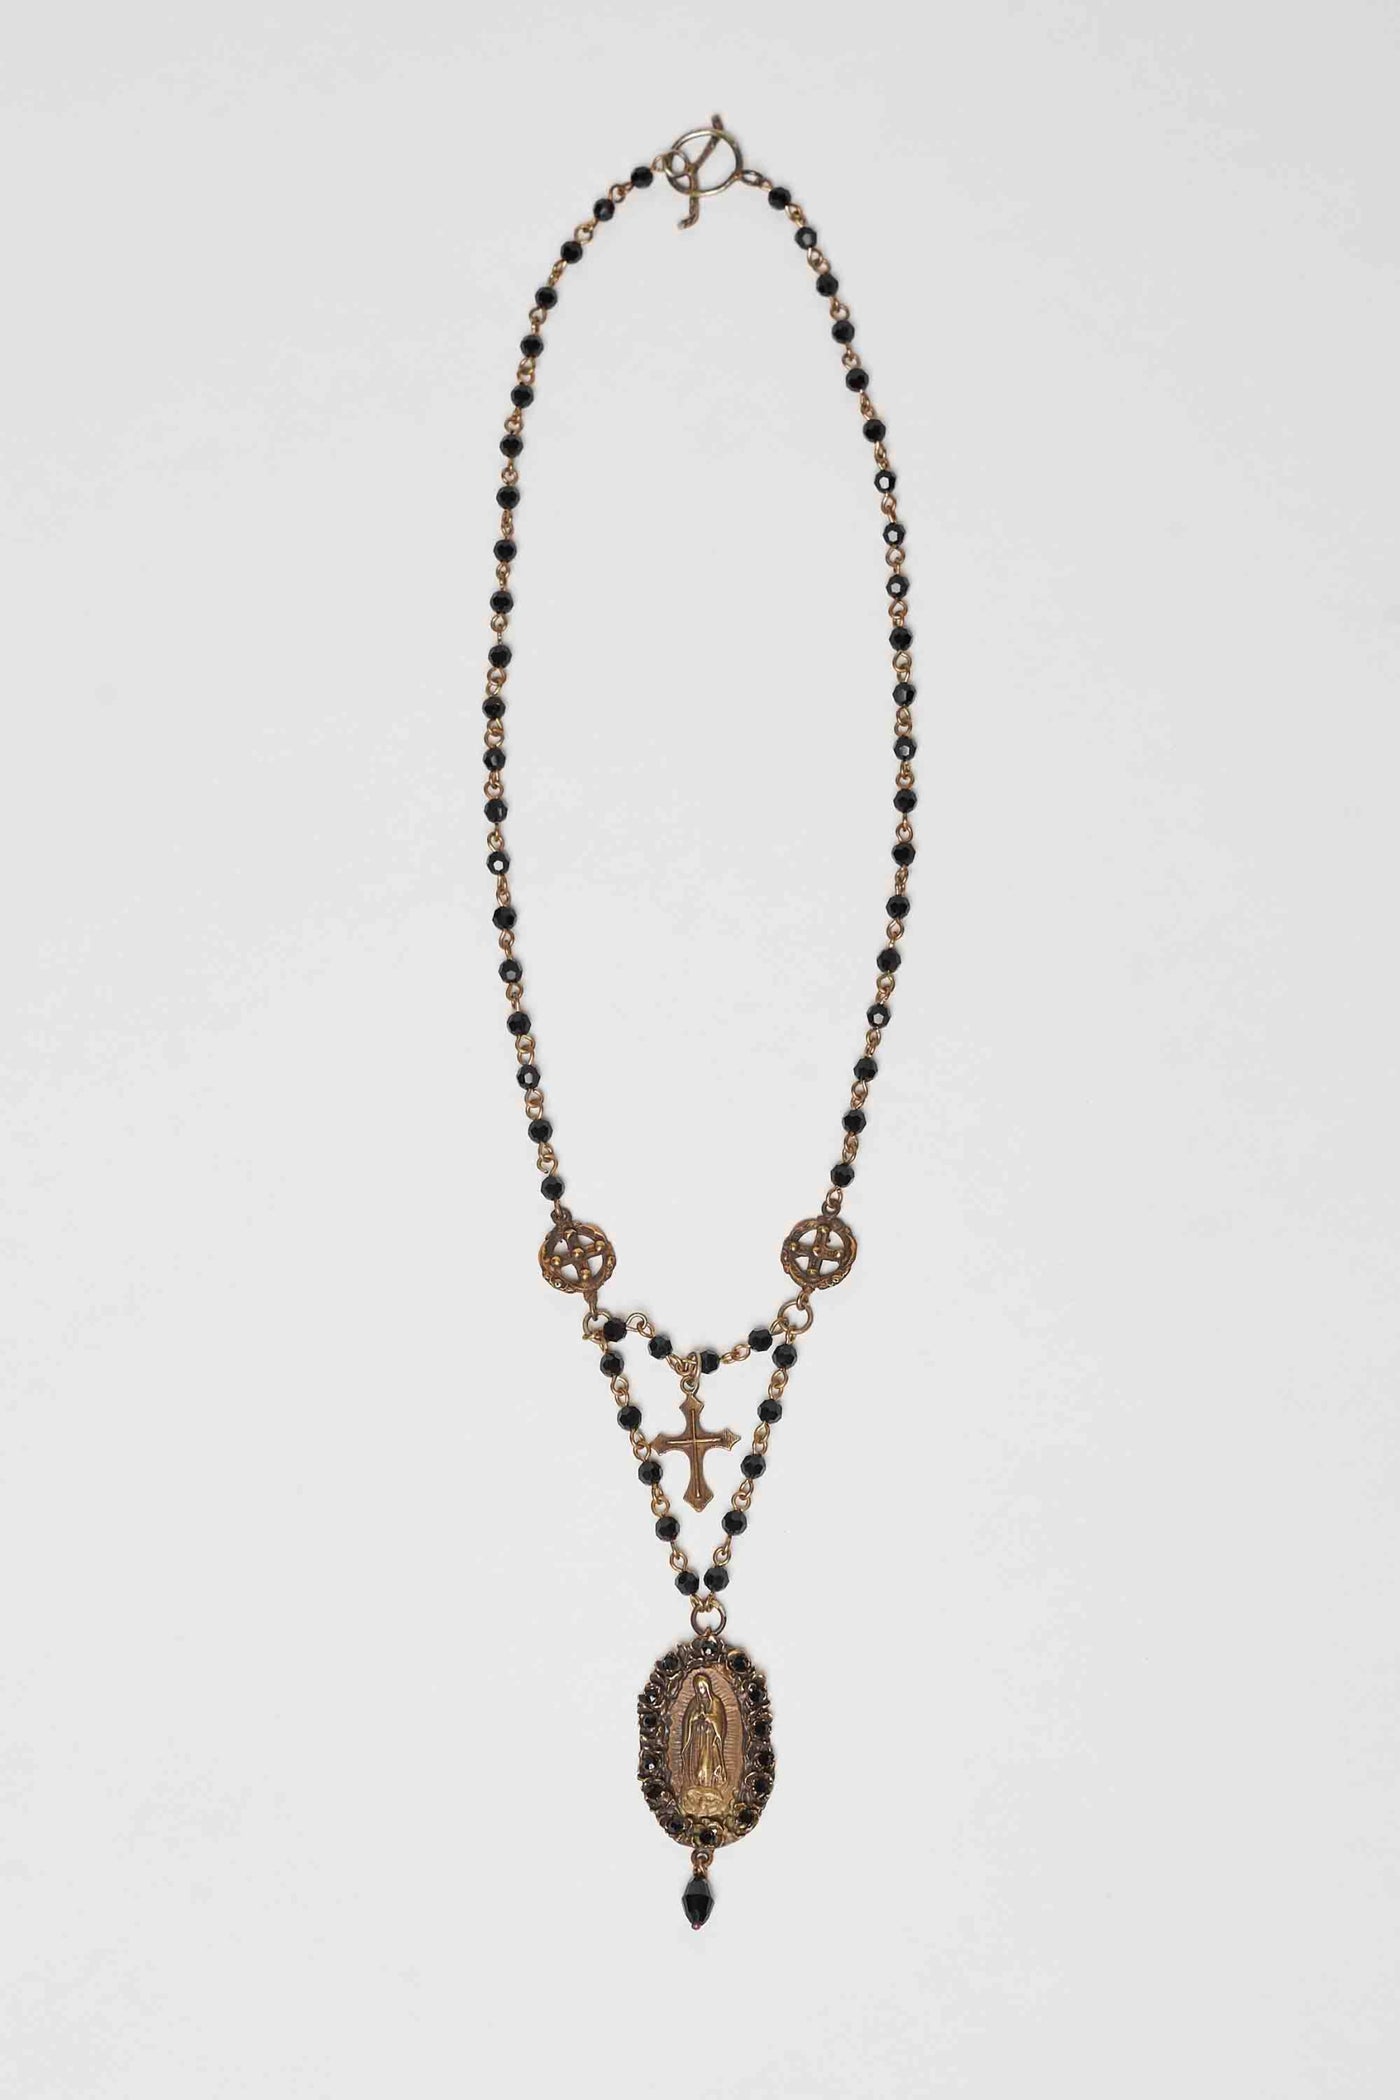 VIRGEN DE GUADALUPE NECKLACE WITH DECORATIVE PENDANTS AND CRYSTALS